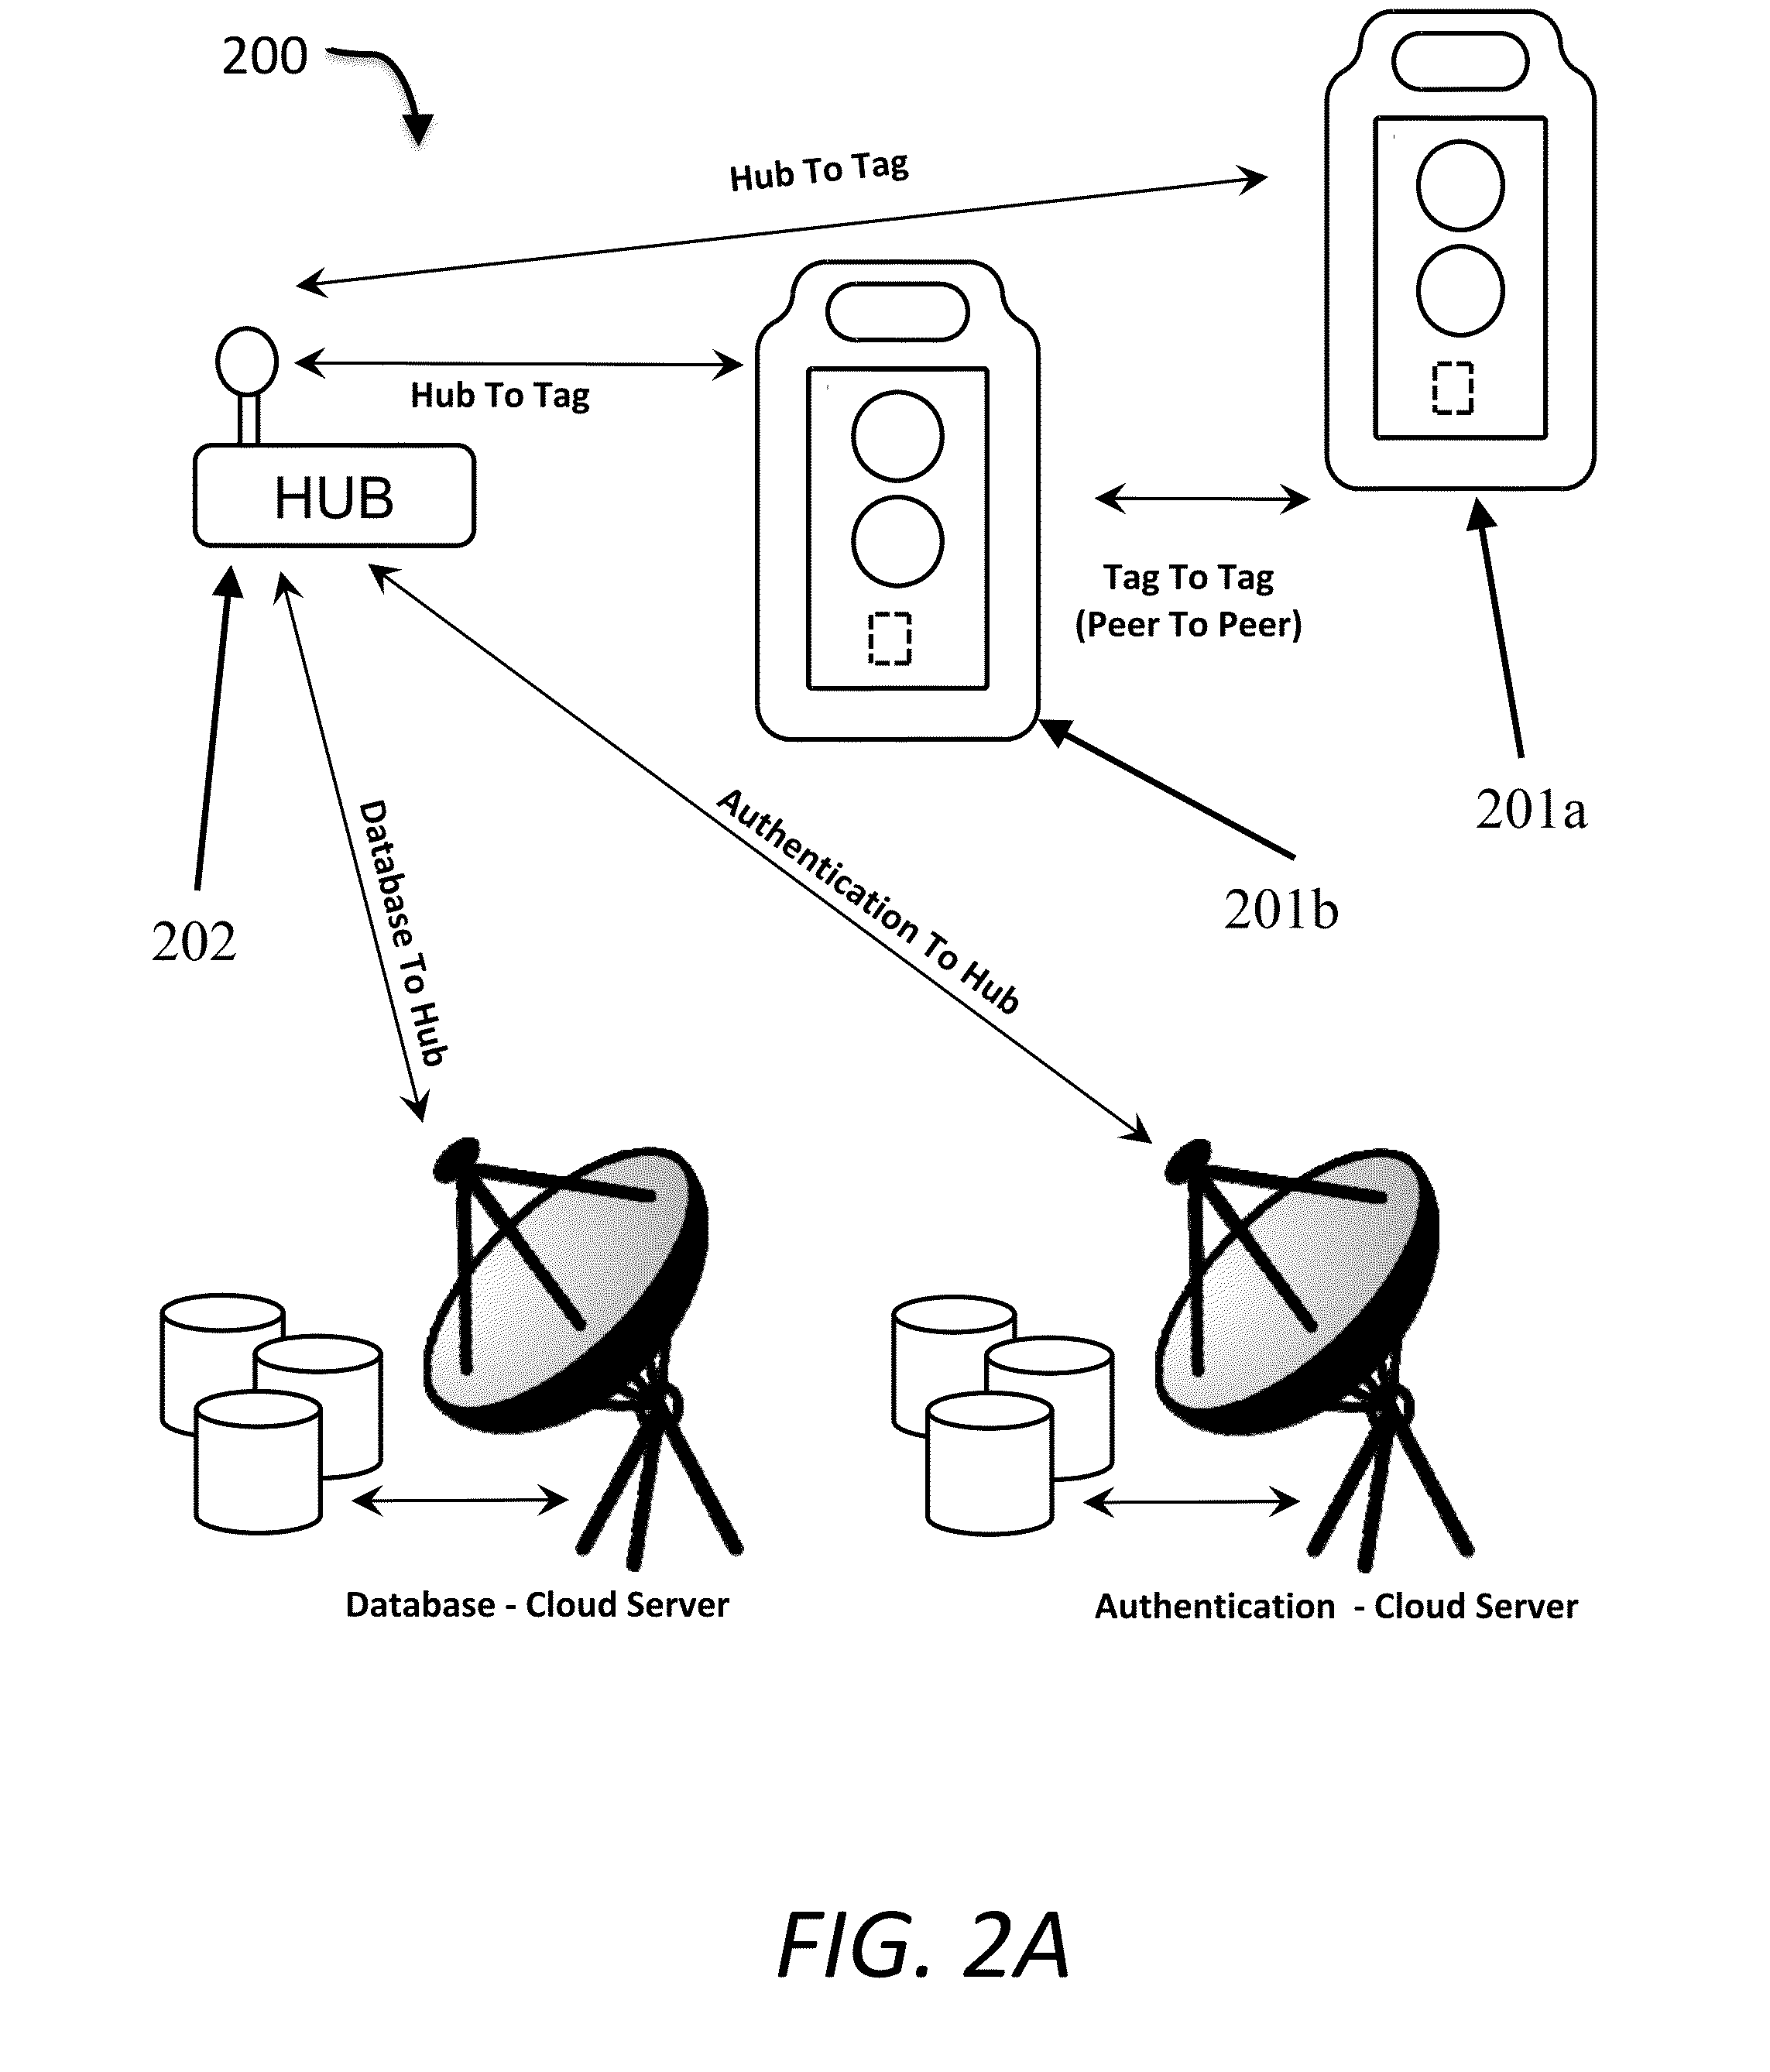 System for inventory tracking and monitoring using a database of low-power active tags and a method for its use